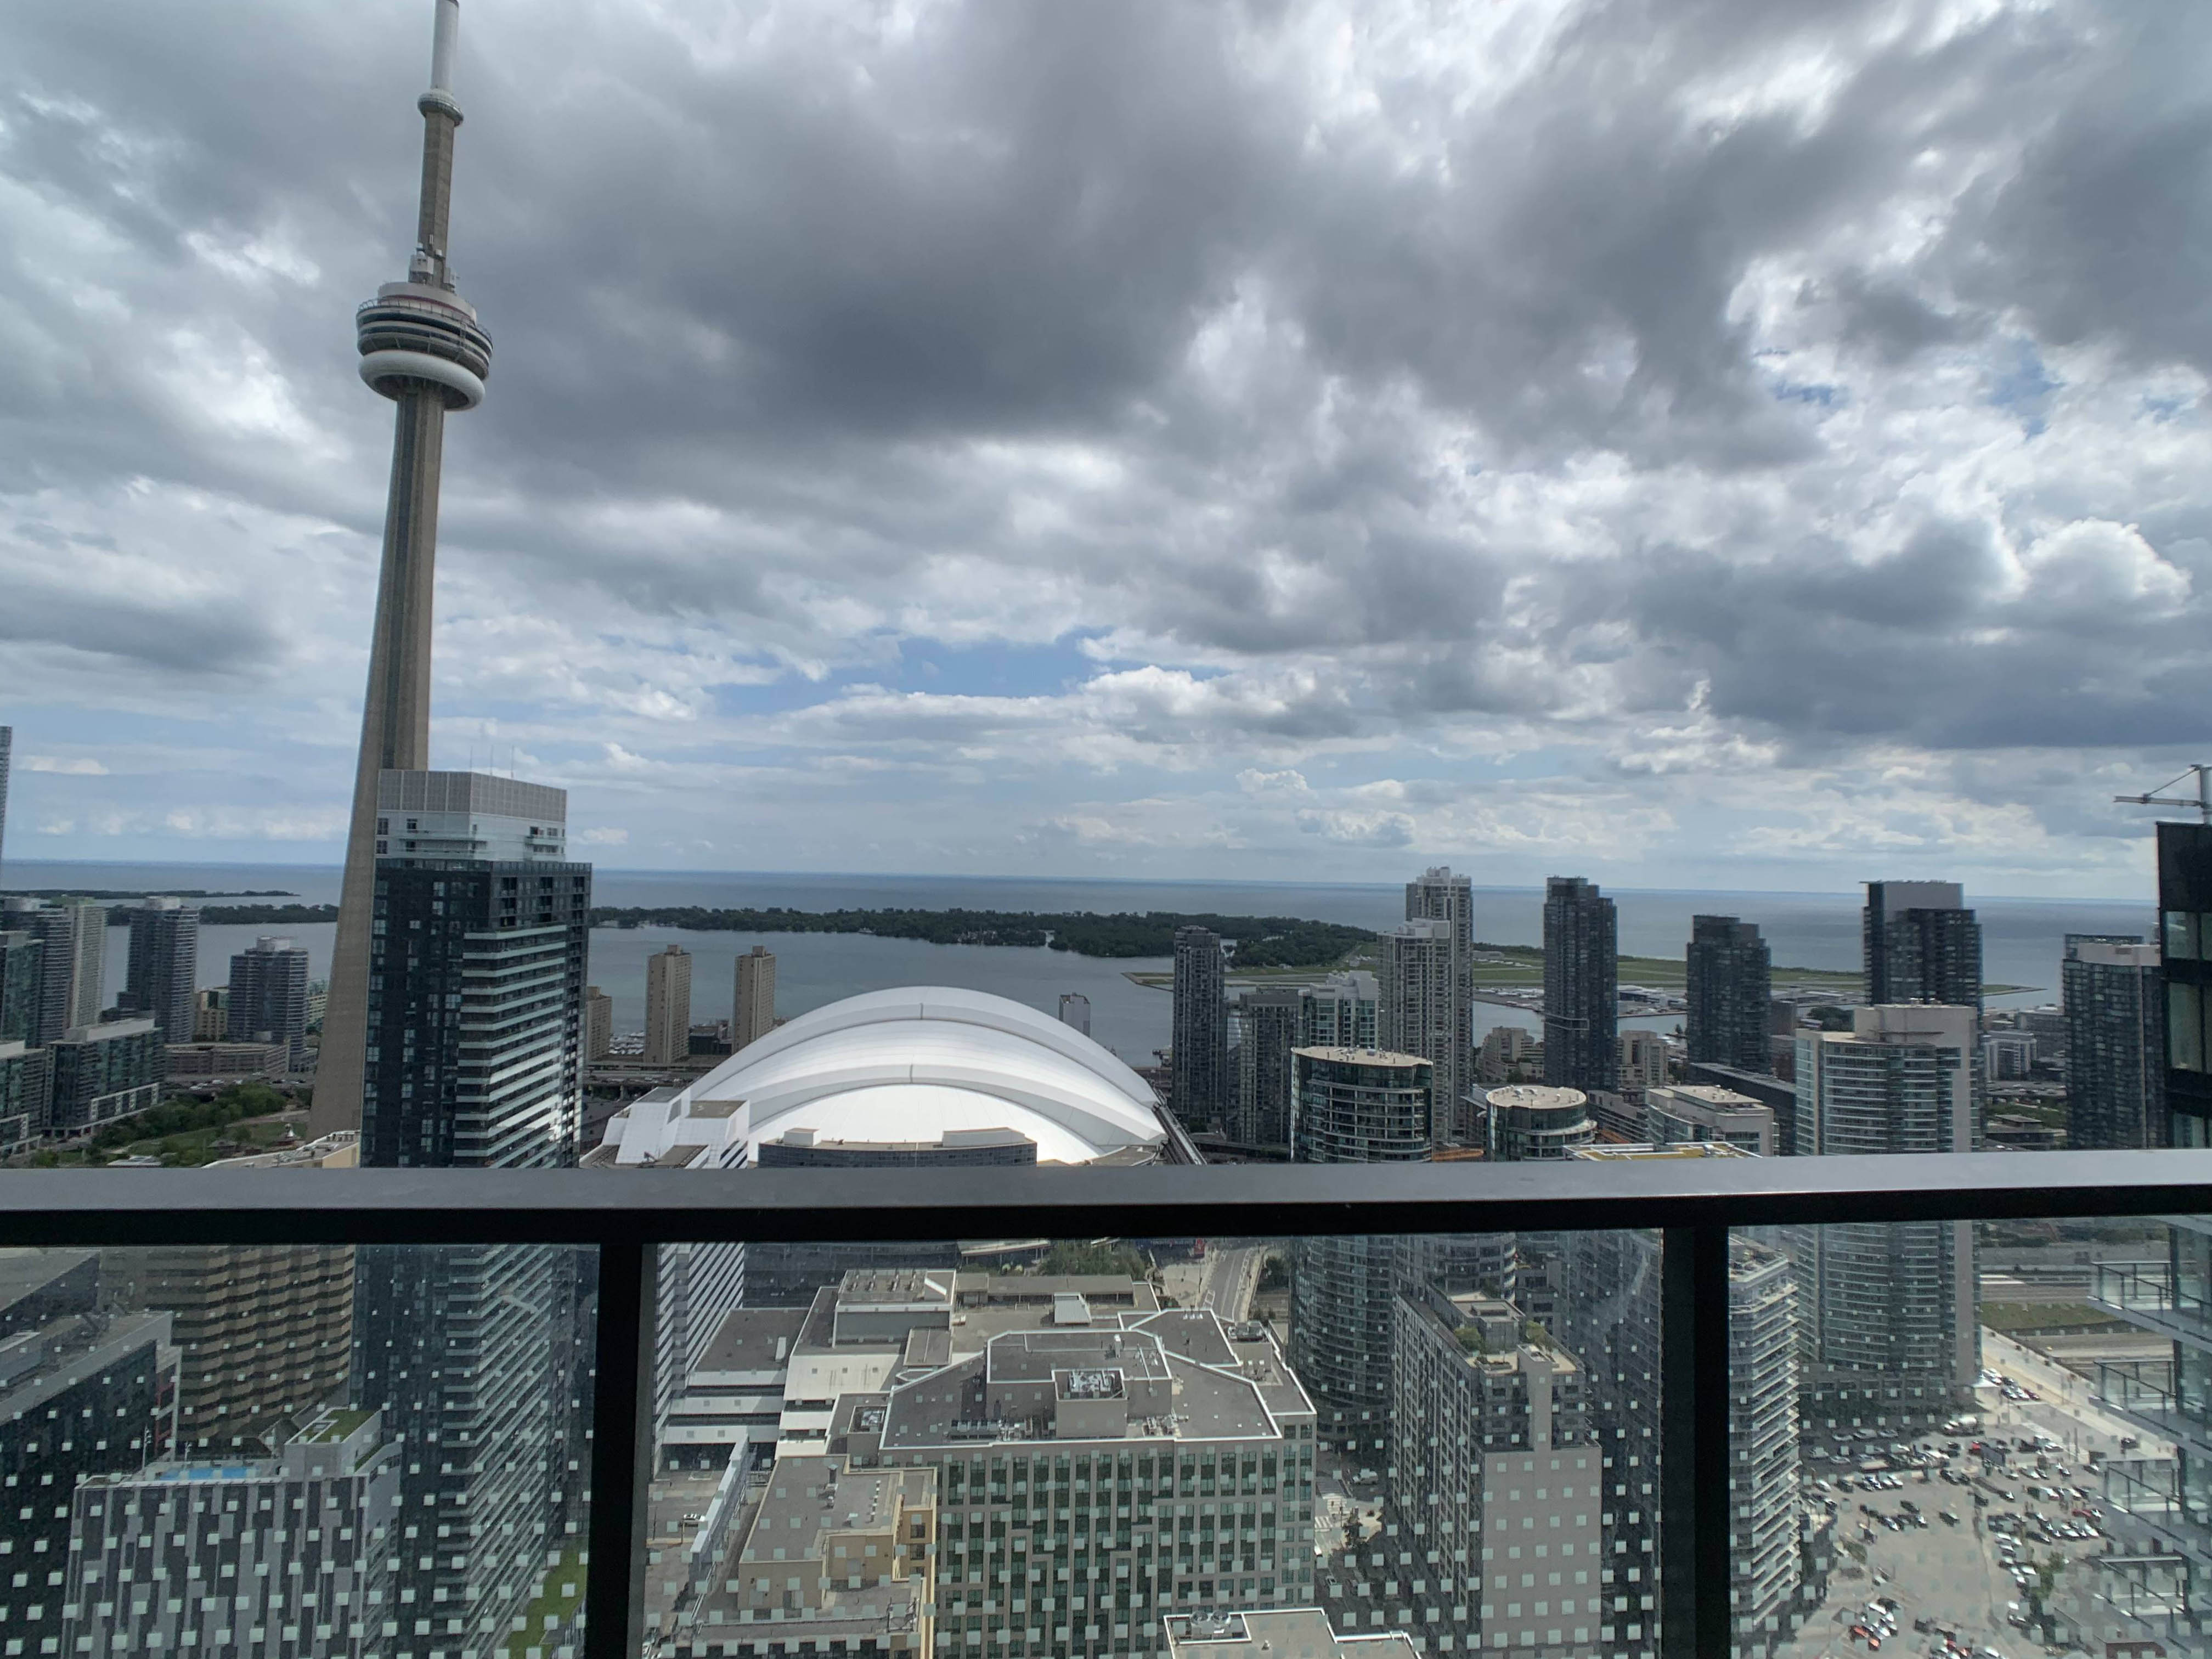 Downtown Toronto 3 Bedroom Condo For Lease: $3,500 - 125 Blue Jays Way On 52 Floor